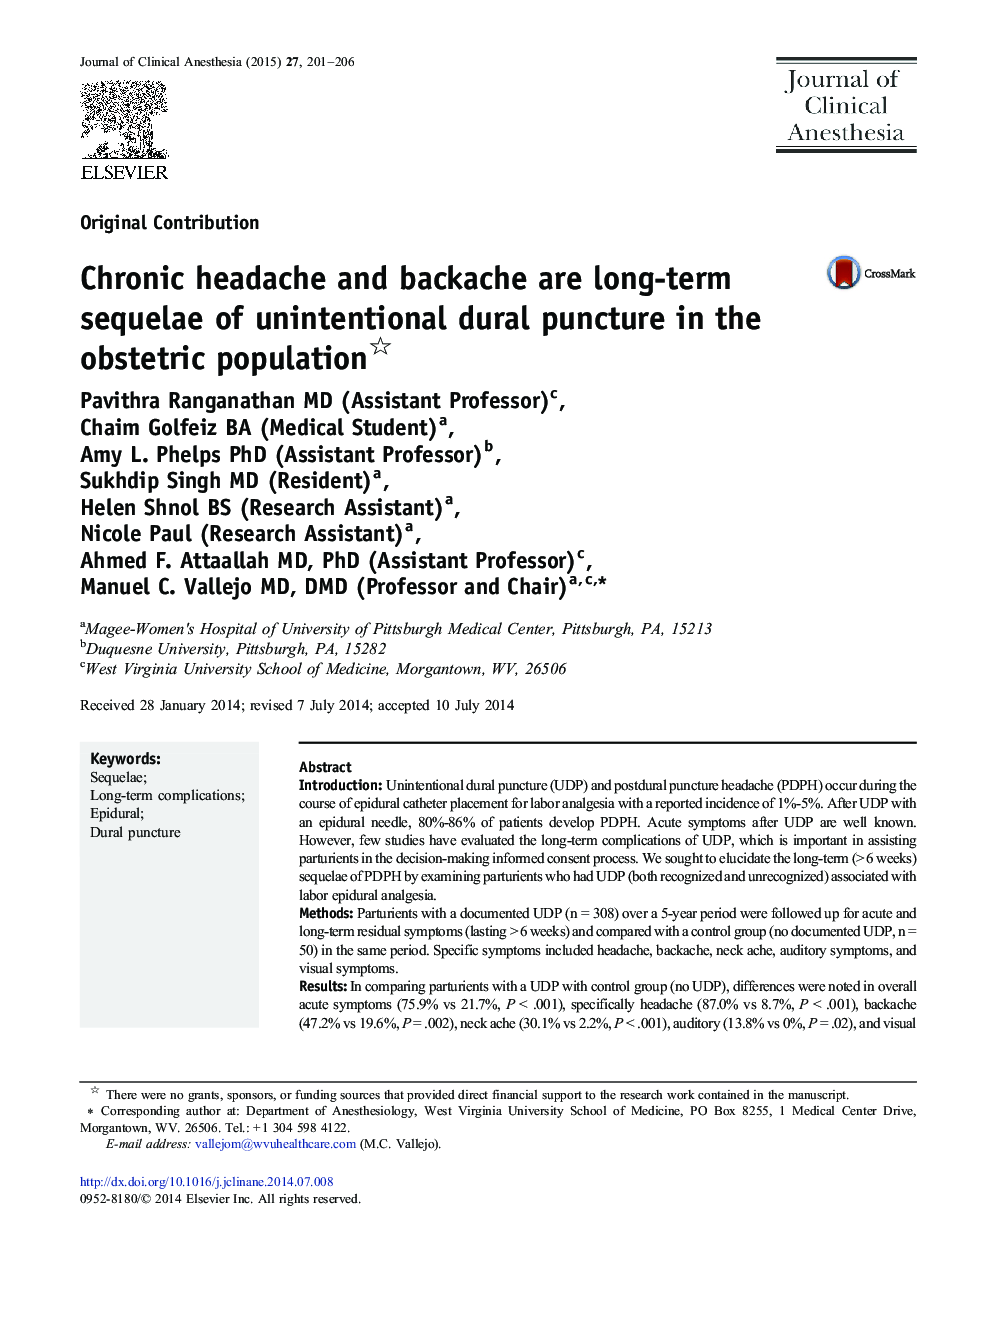 Chronic headache and backache are long-term sequelae of unintentional dural puncture in the obstetric population 